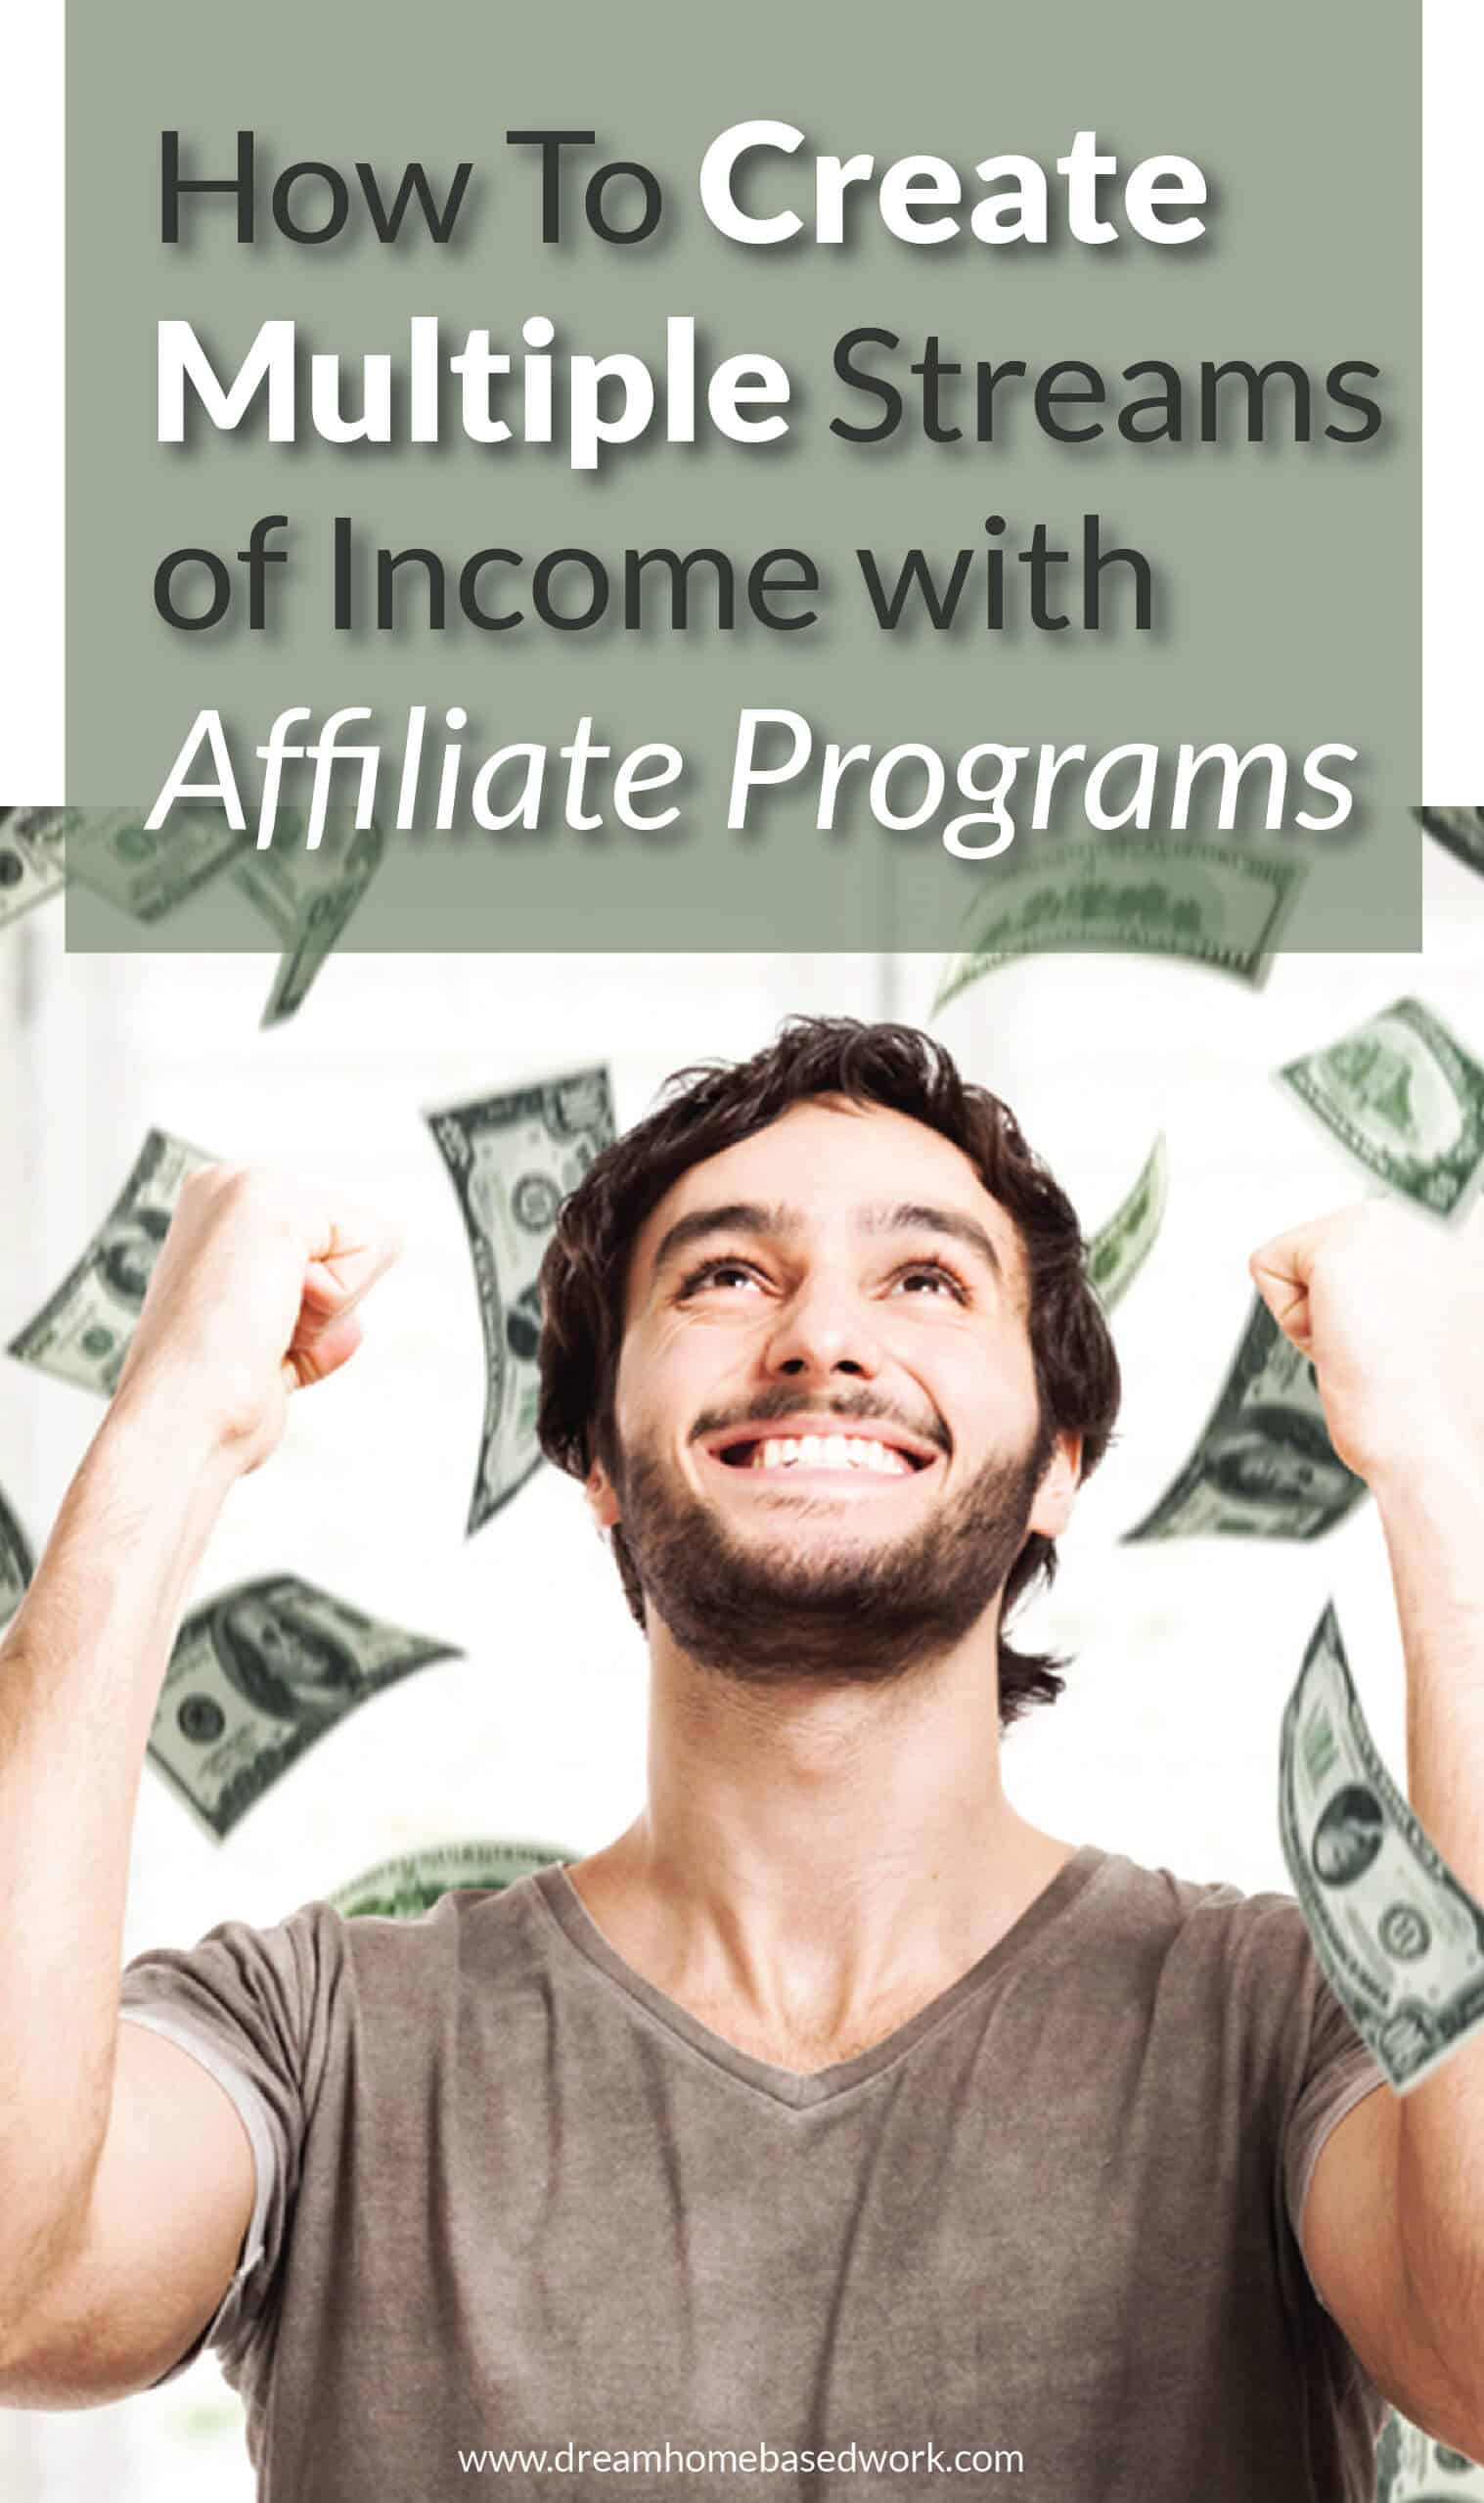 How to Create Multiple Streams of Income with Affiliate Programs